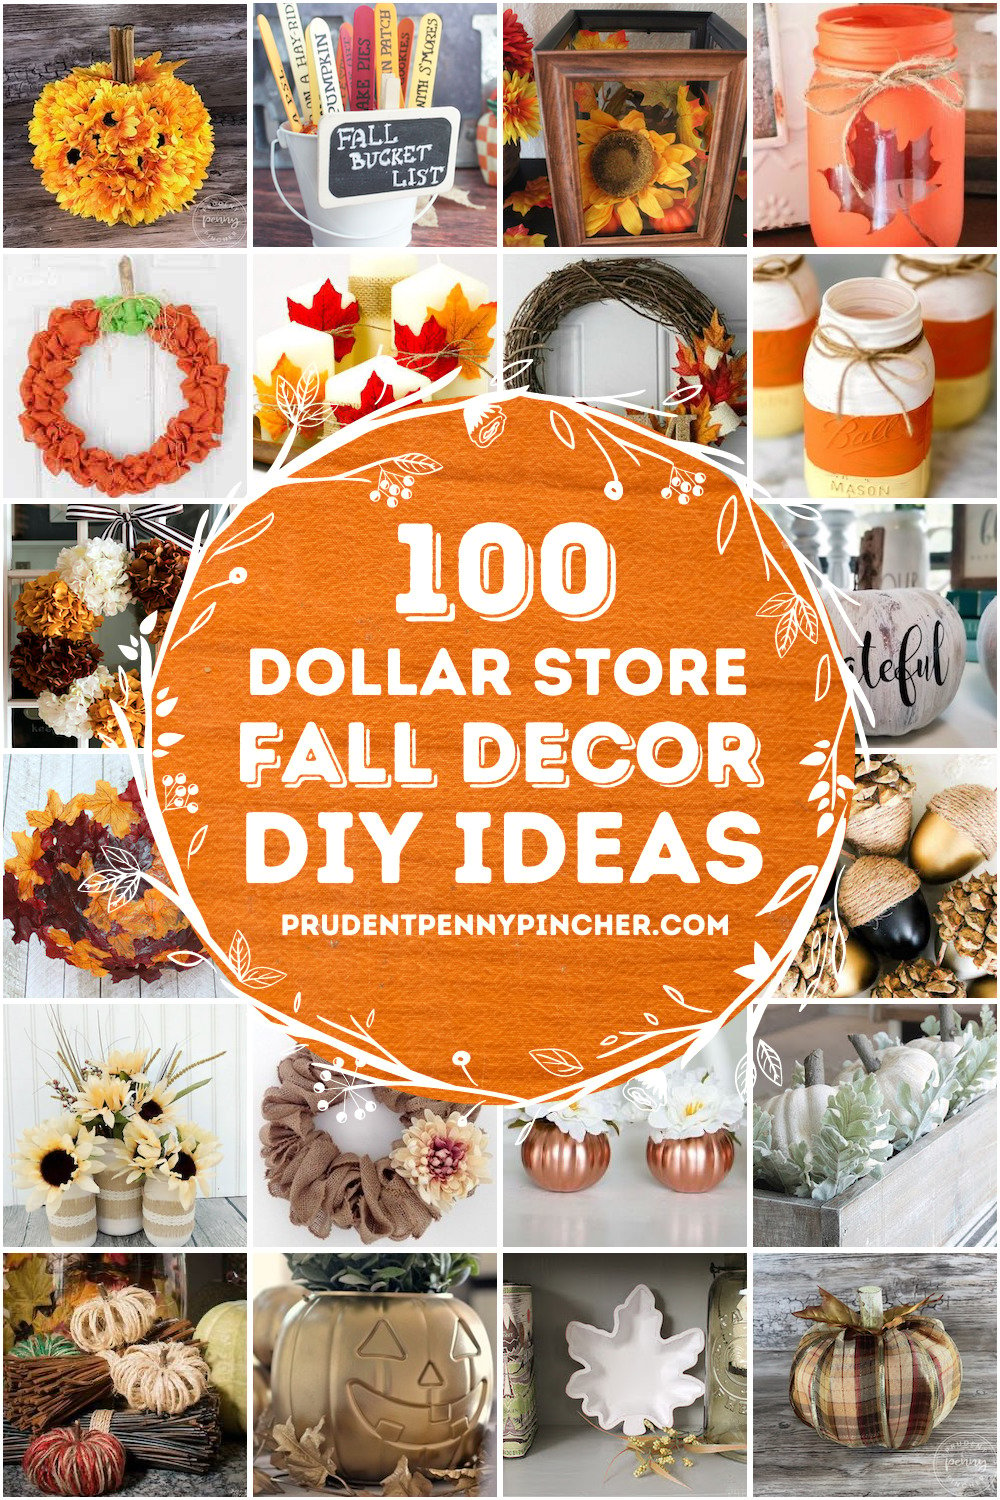 100 Dollar Store Fall Decor Ideas for 2022 - Prudent Penny Pincher